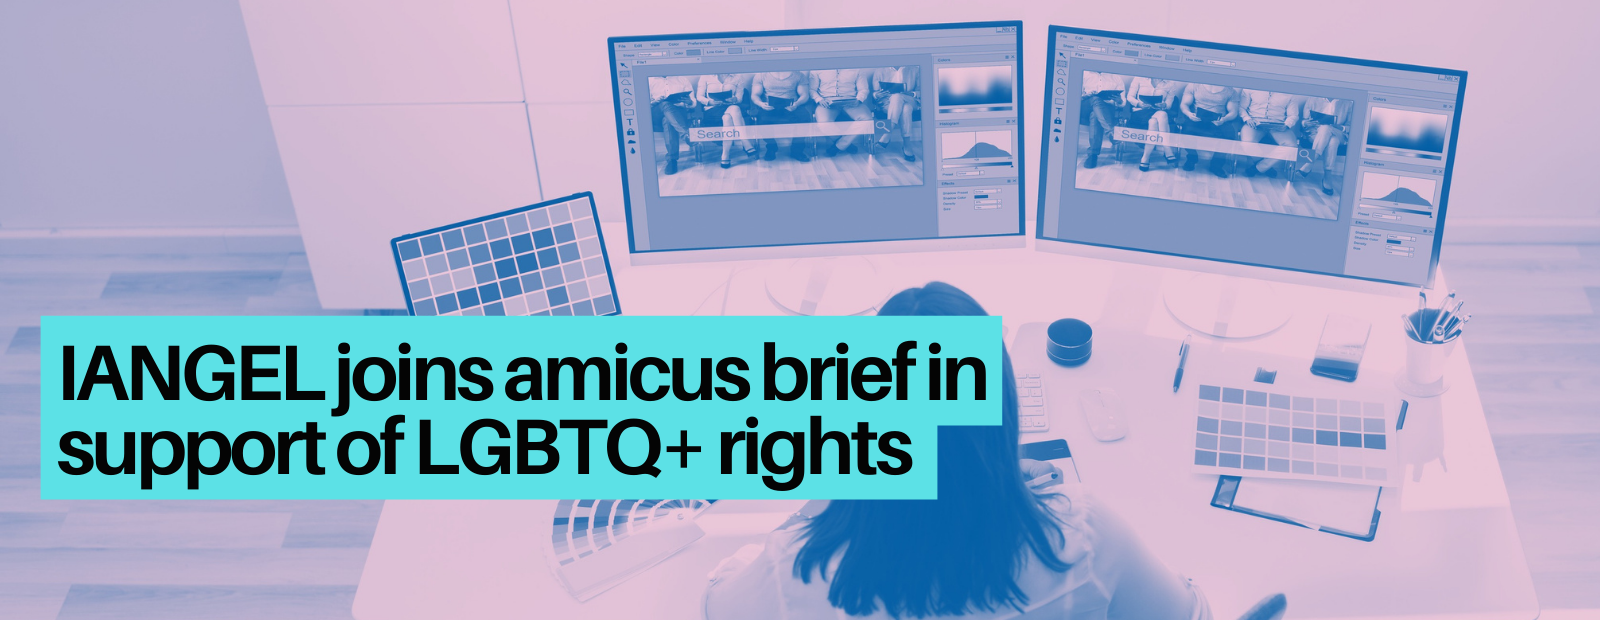 Iangel Joins Amicus Brief In Support Of Lgbtq Rights International Action Network For Gender